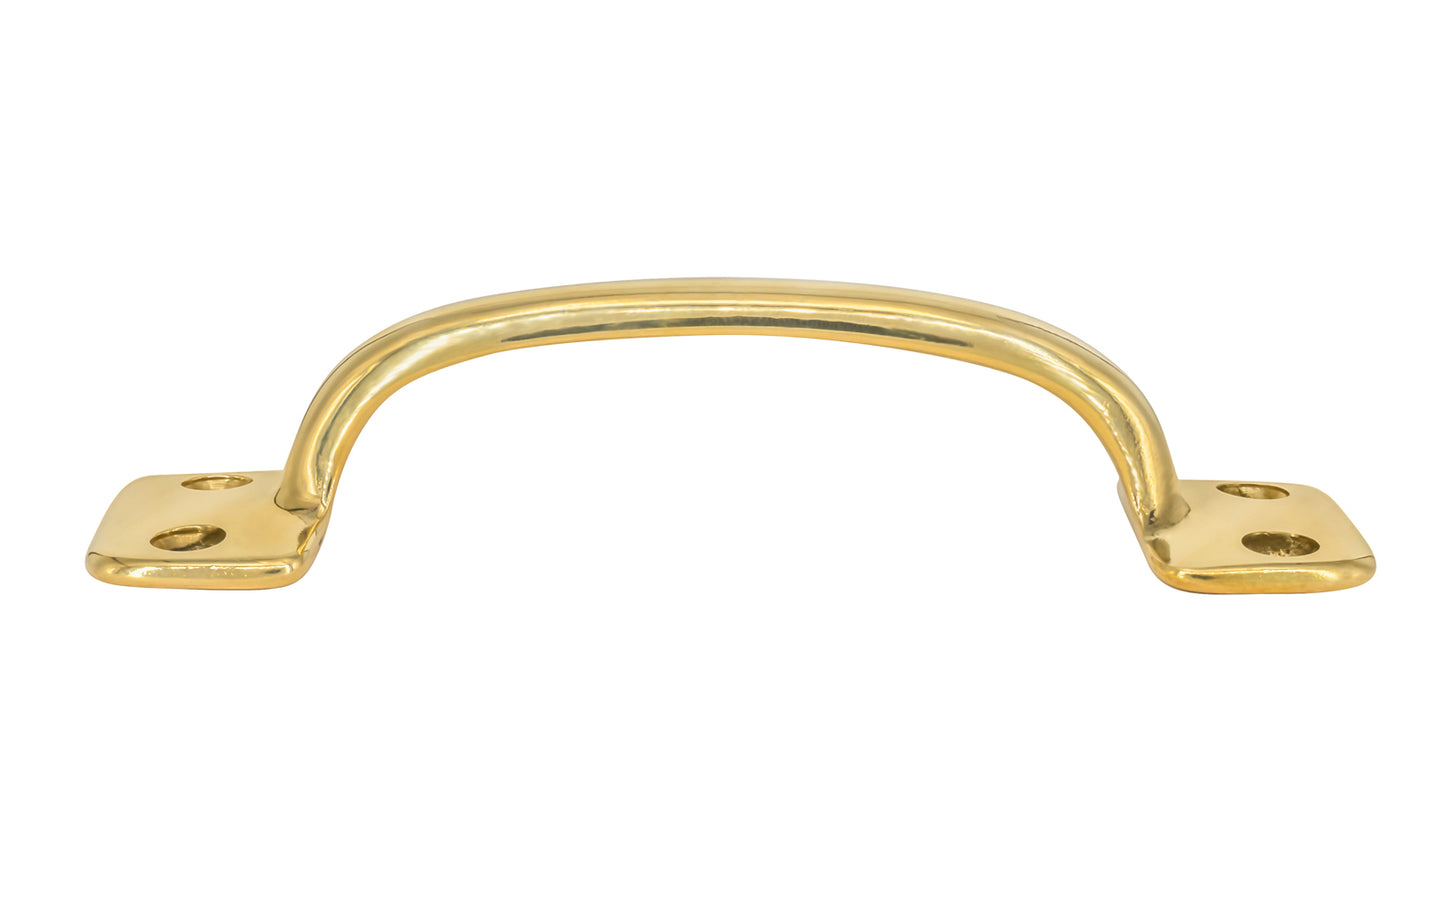 Vintage-style Hardware · Classic Solid Brass Handle Pull ~ 4" On Centers. Versatile handle is great for sash windows, cabinets, drawers, file cabinets. Arts & Crafts handle pull. Unlacquered Brass (will patina over time). Un-lacquered brass. Non-lacquered brass.